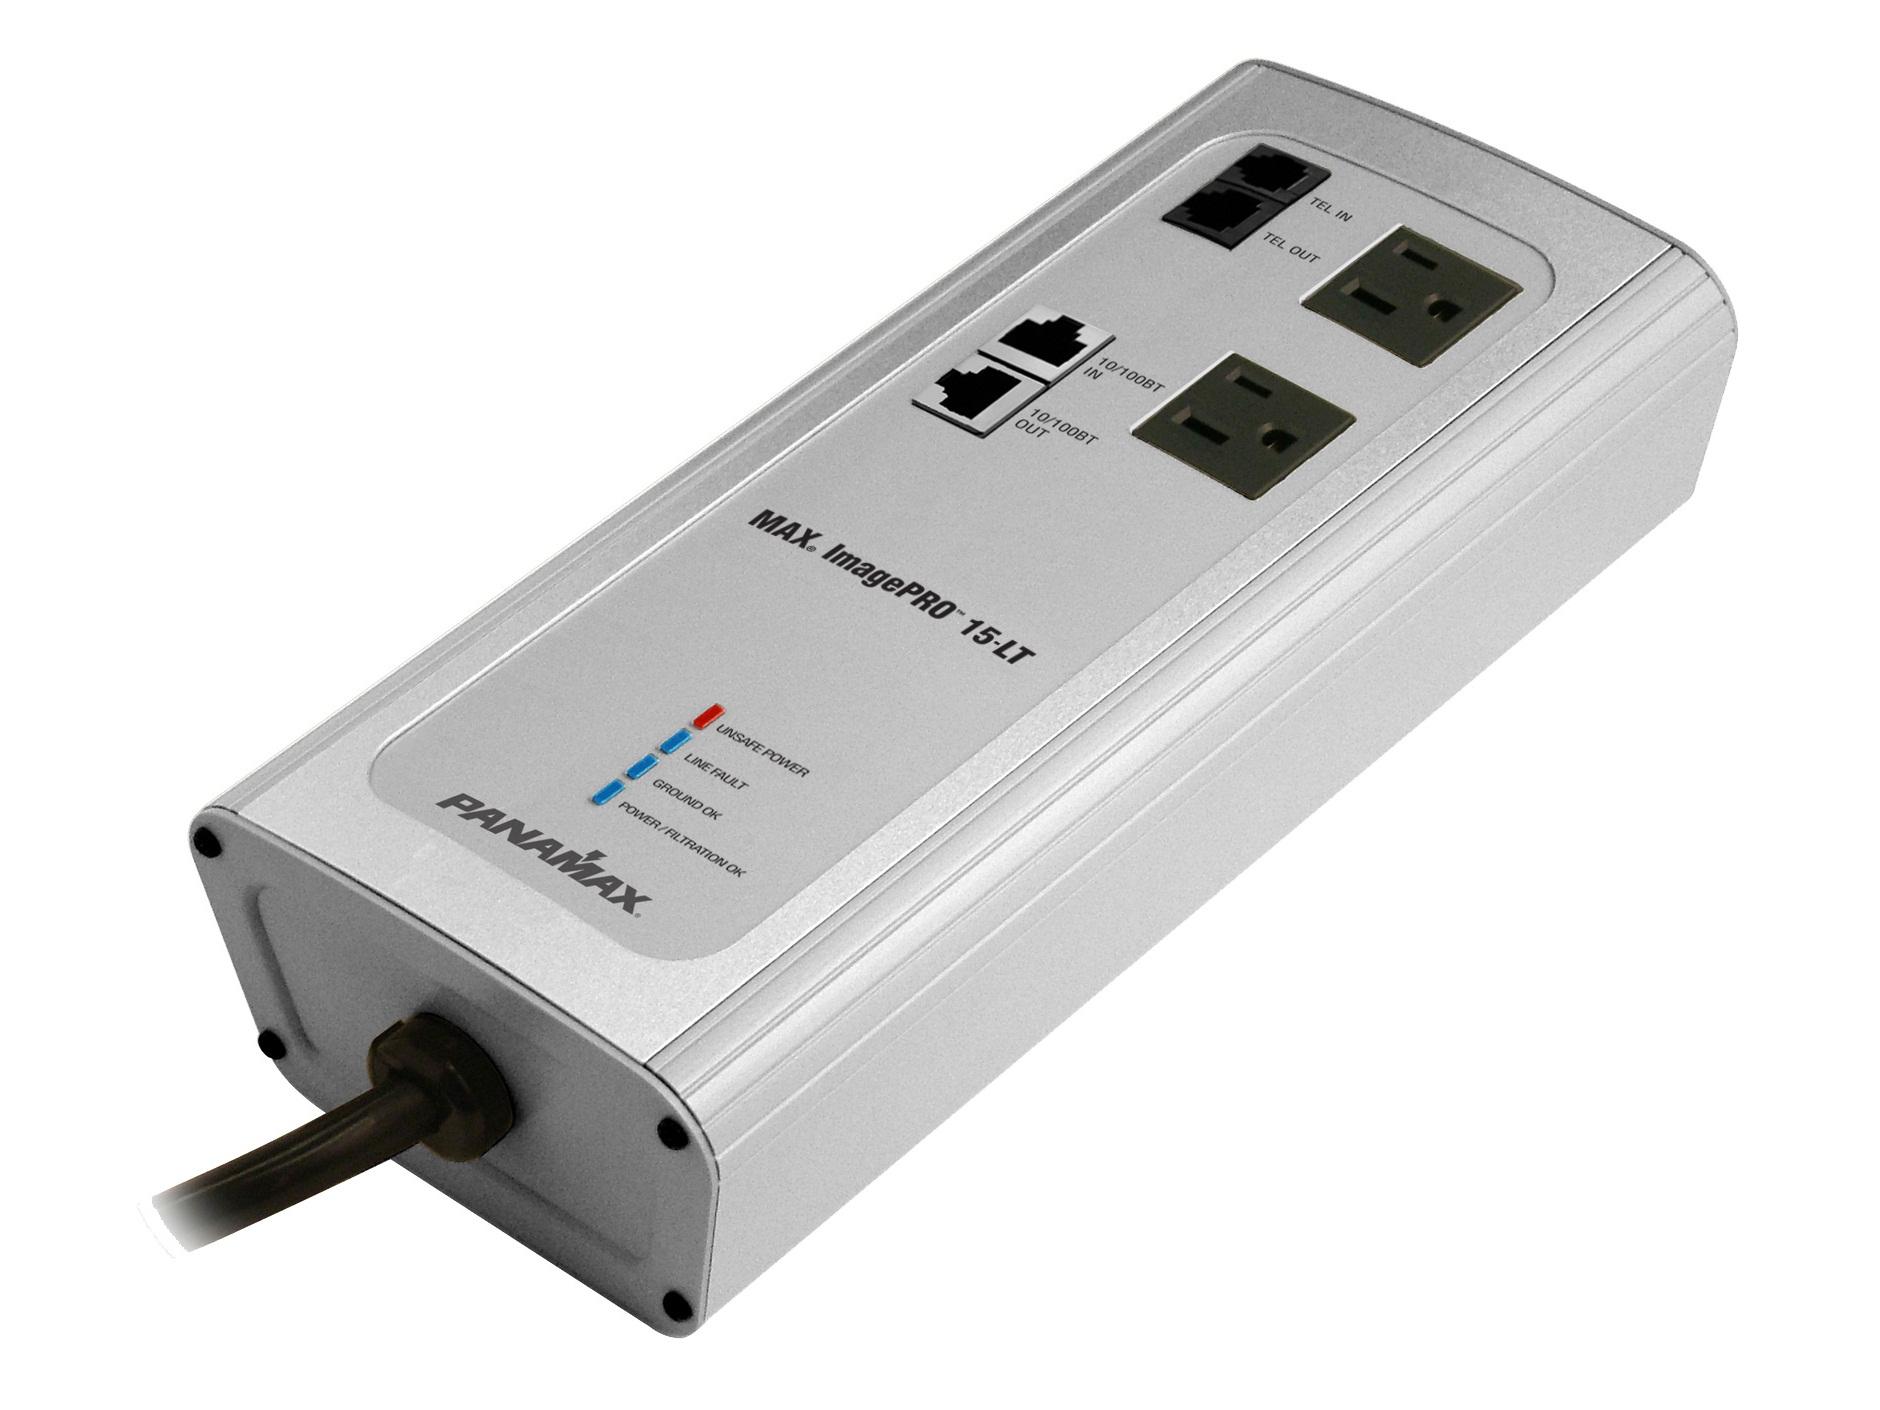 Panamax MIP-15LT 2 Outlets Telco/LAN Surge Protector